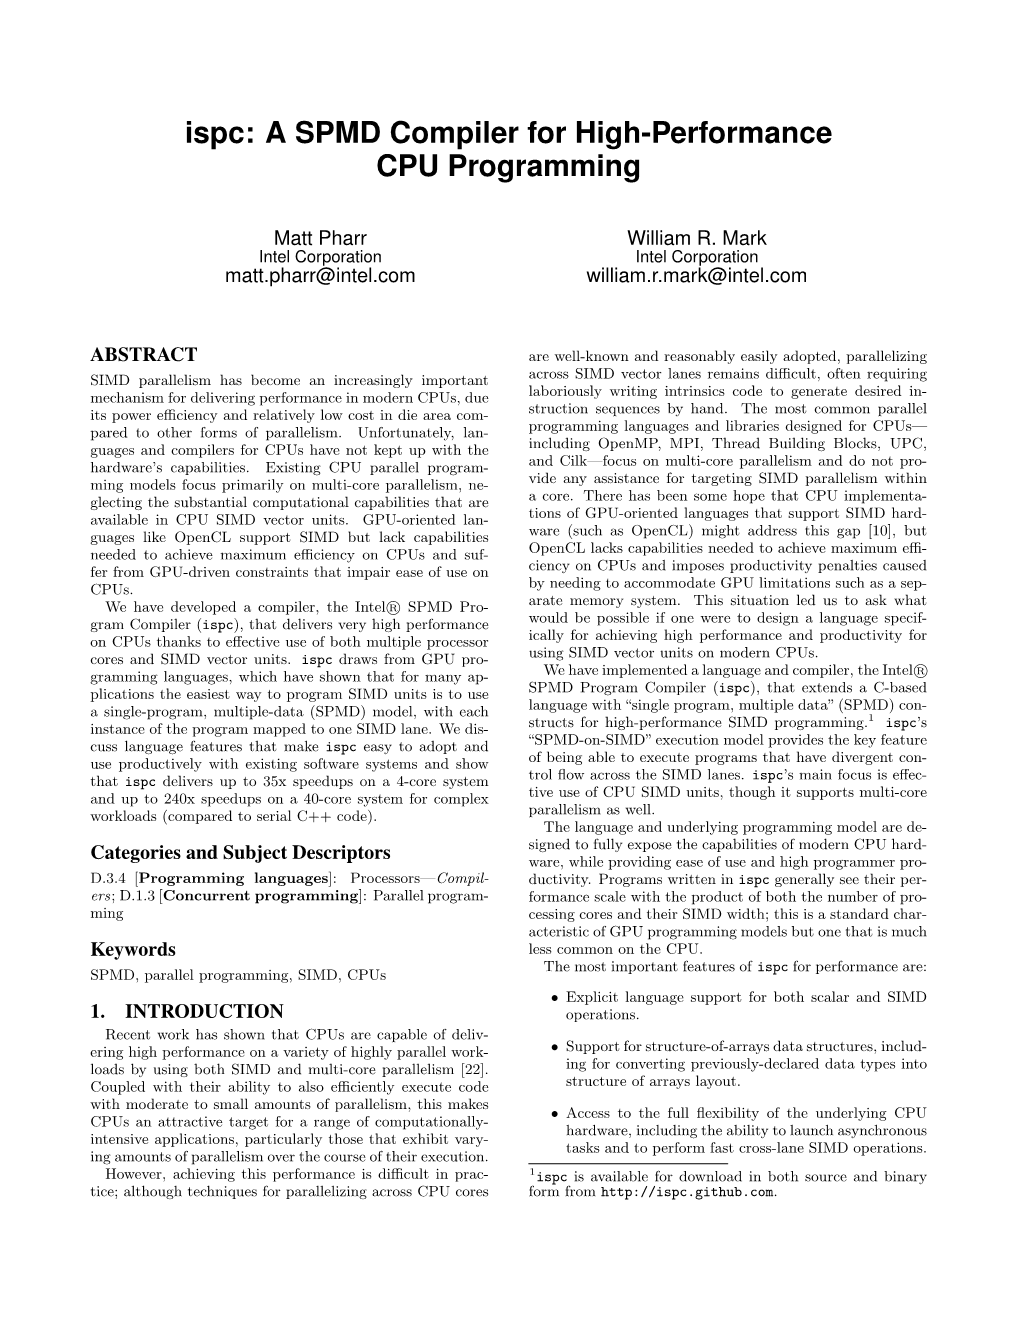 Ispc: a SPMD Compiler for High-Performance CPU Programming